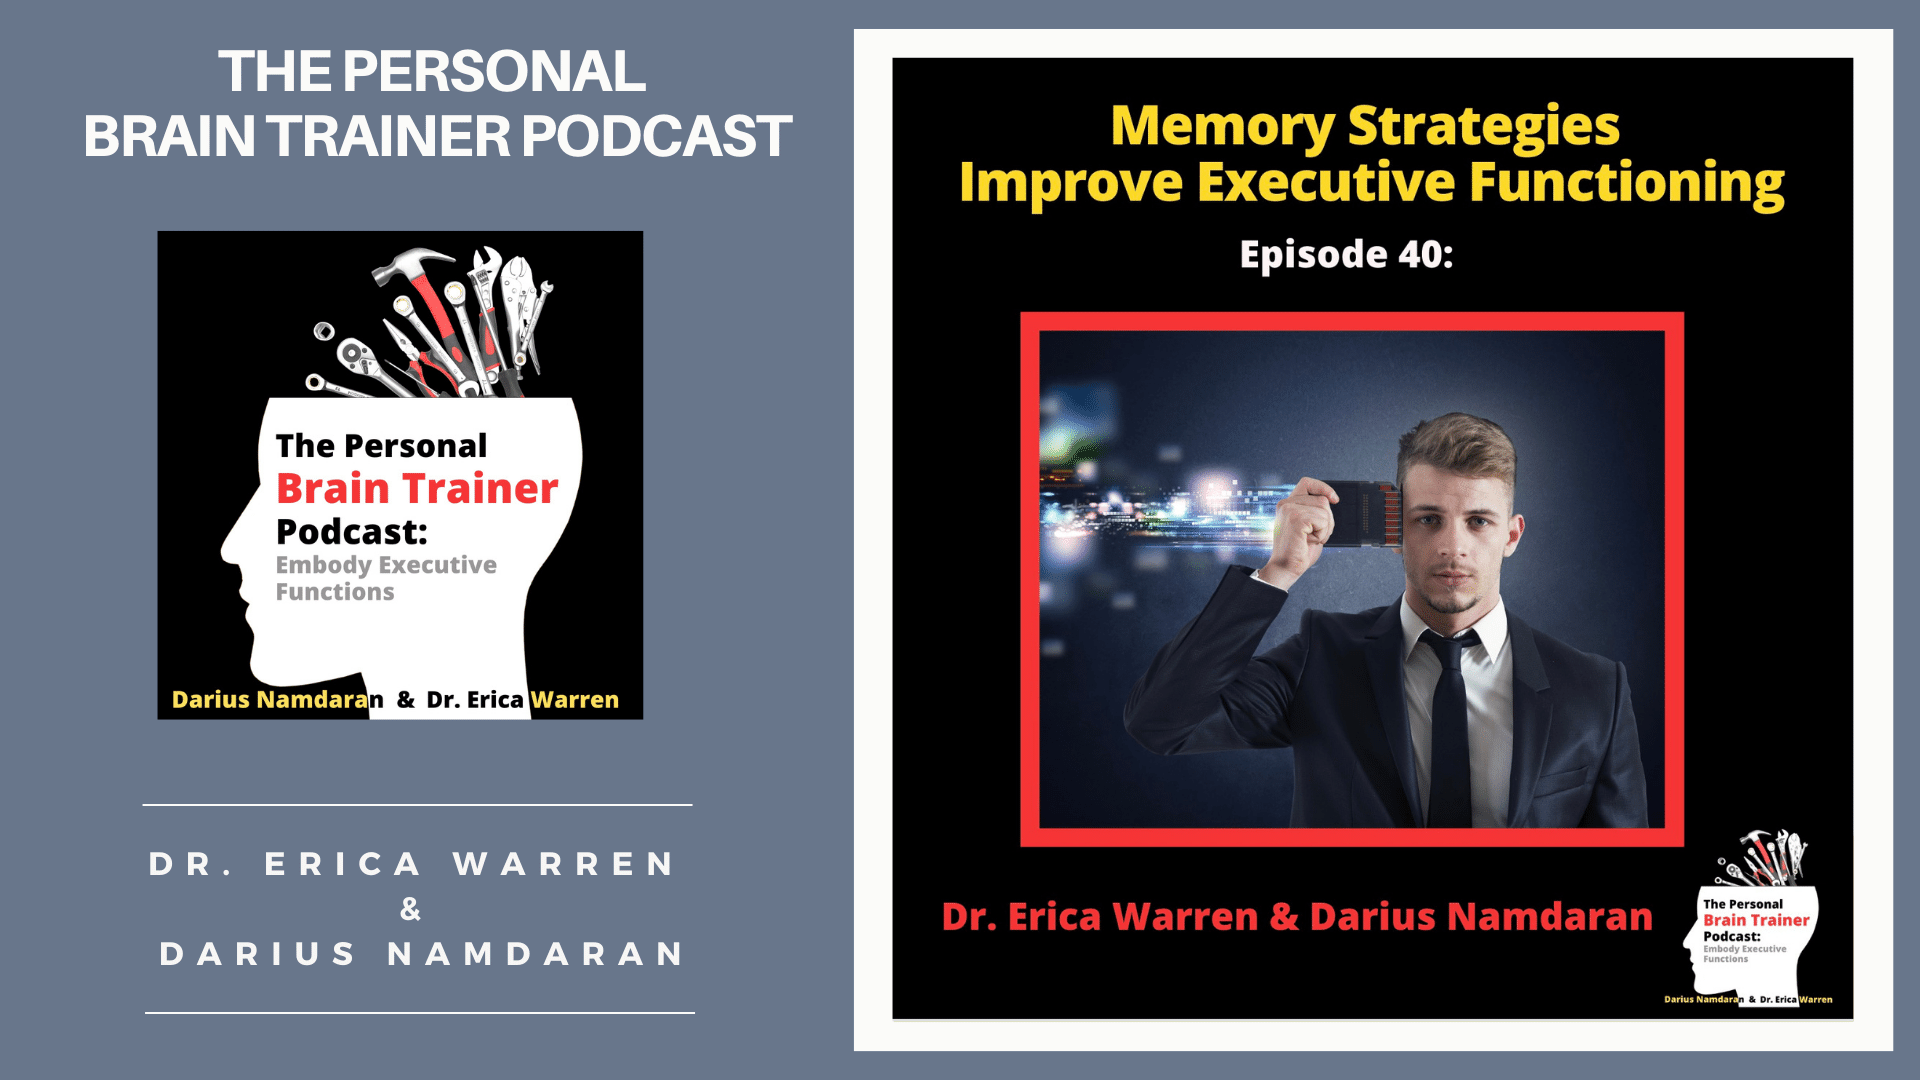 Memory strategies and executive functioning